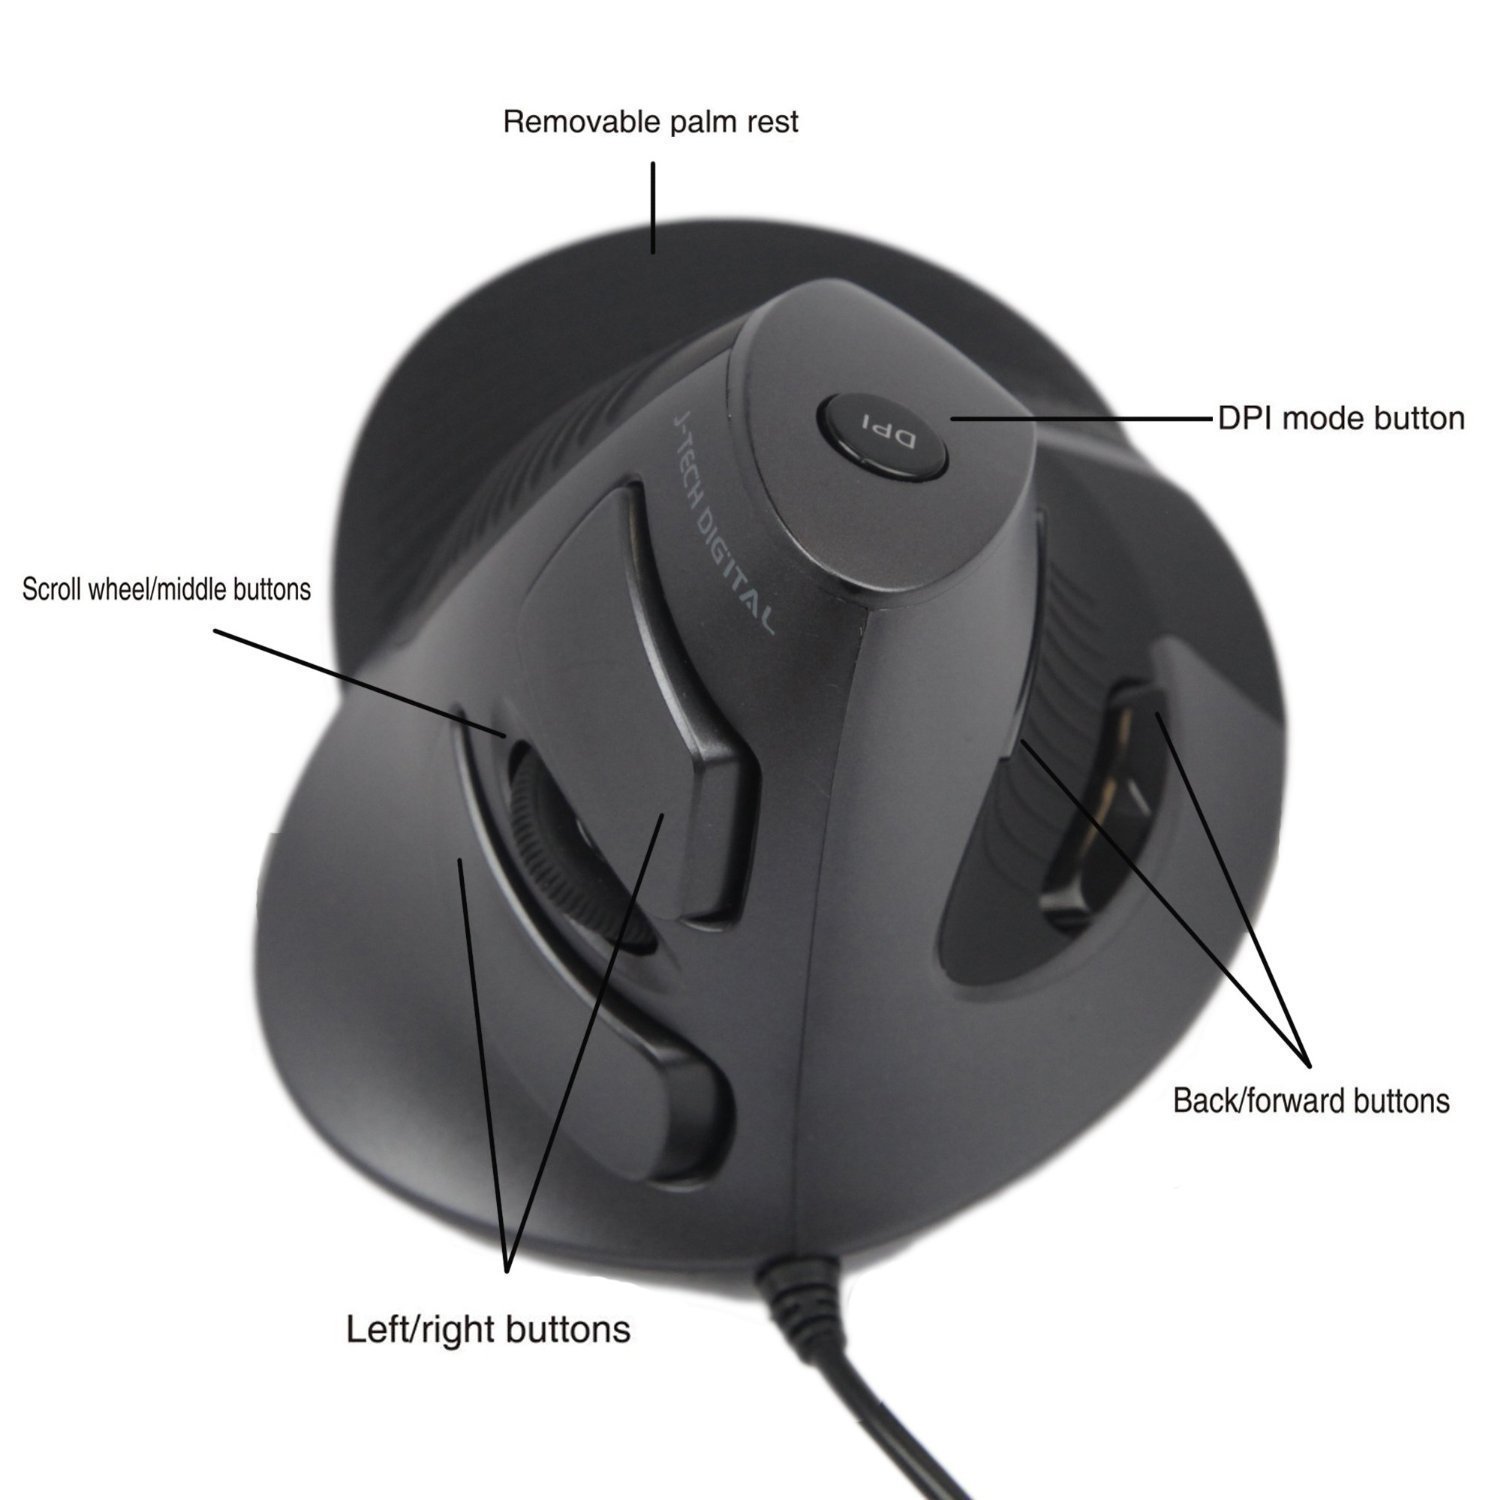 J-Tech Digital Scroll Endurance Wired Mouse Ergonomic Vertical USB Mouse with Adjustable Sensitivity (600/1000/1600 DPI), Removable Palm Rest & Thumb Buttons - Reduces Hand/Wrist Pain (Wired) - $17.95